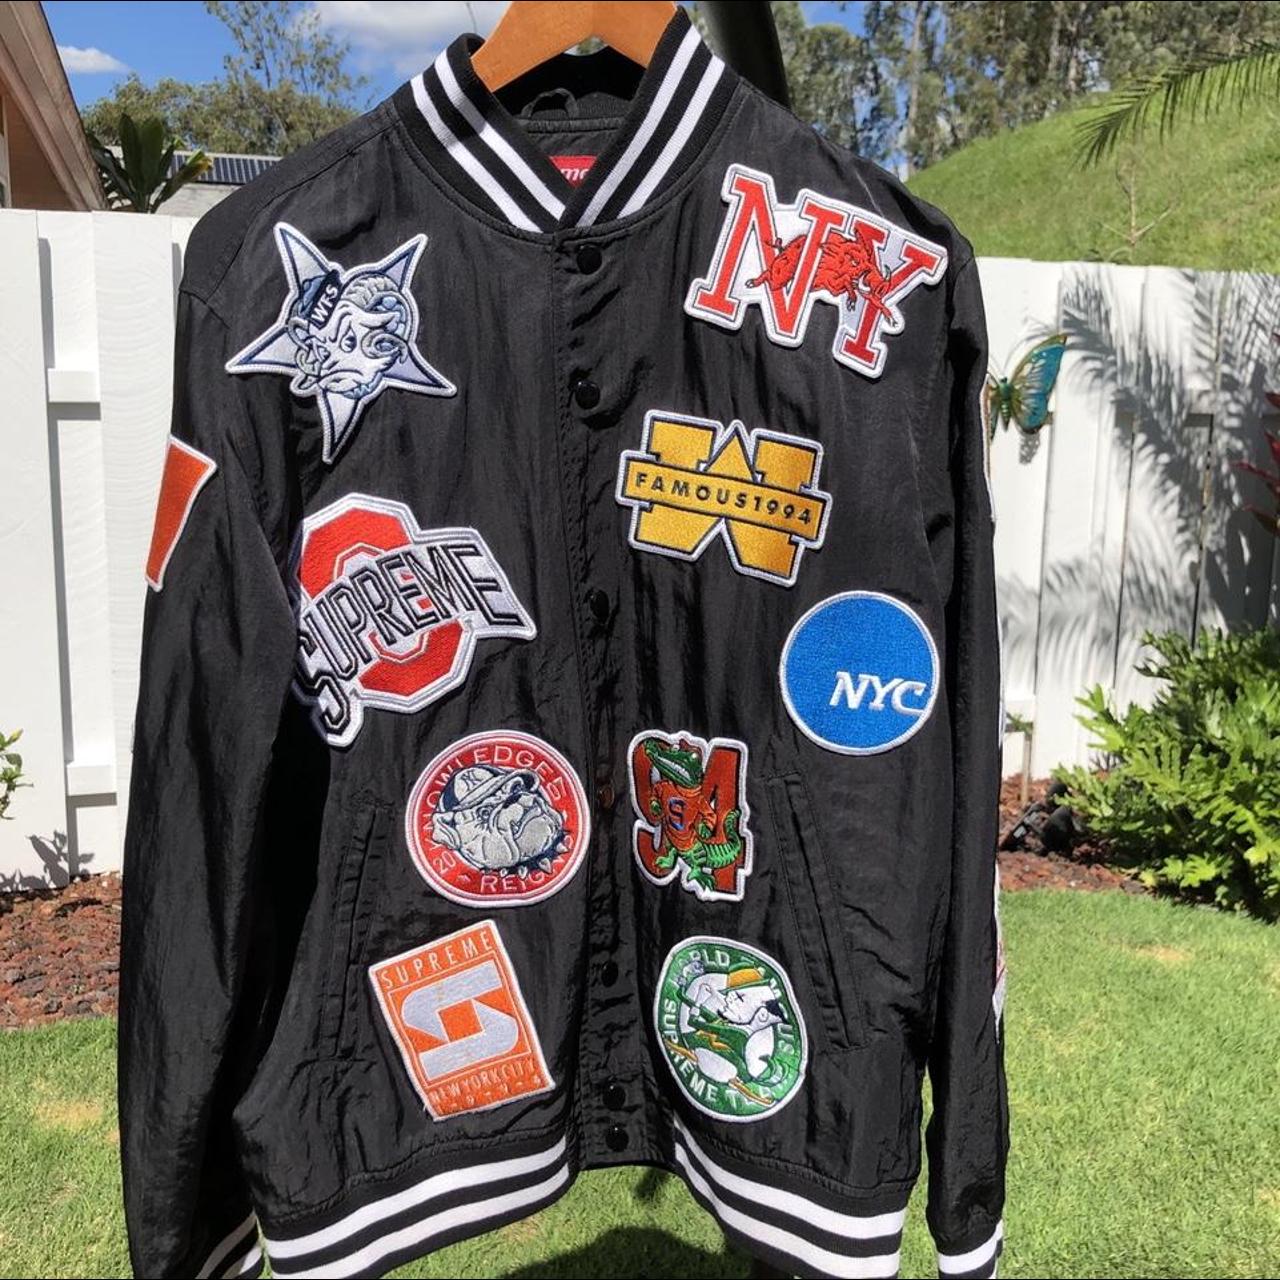 Supreme Ncaa varsity jacket , If you know, you know...